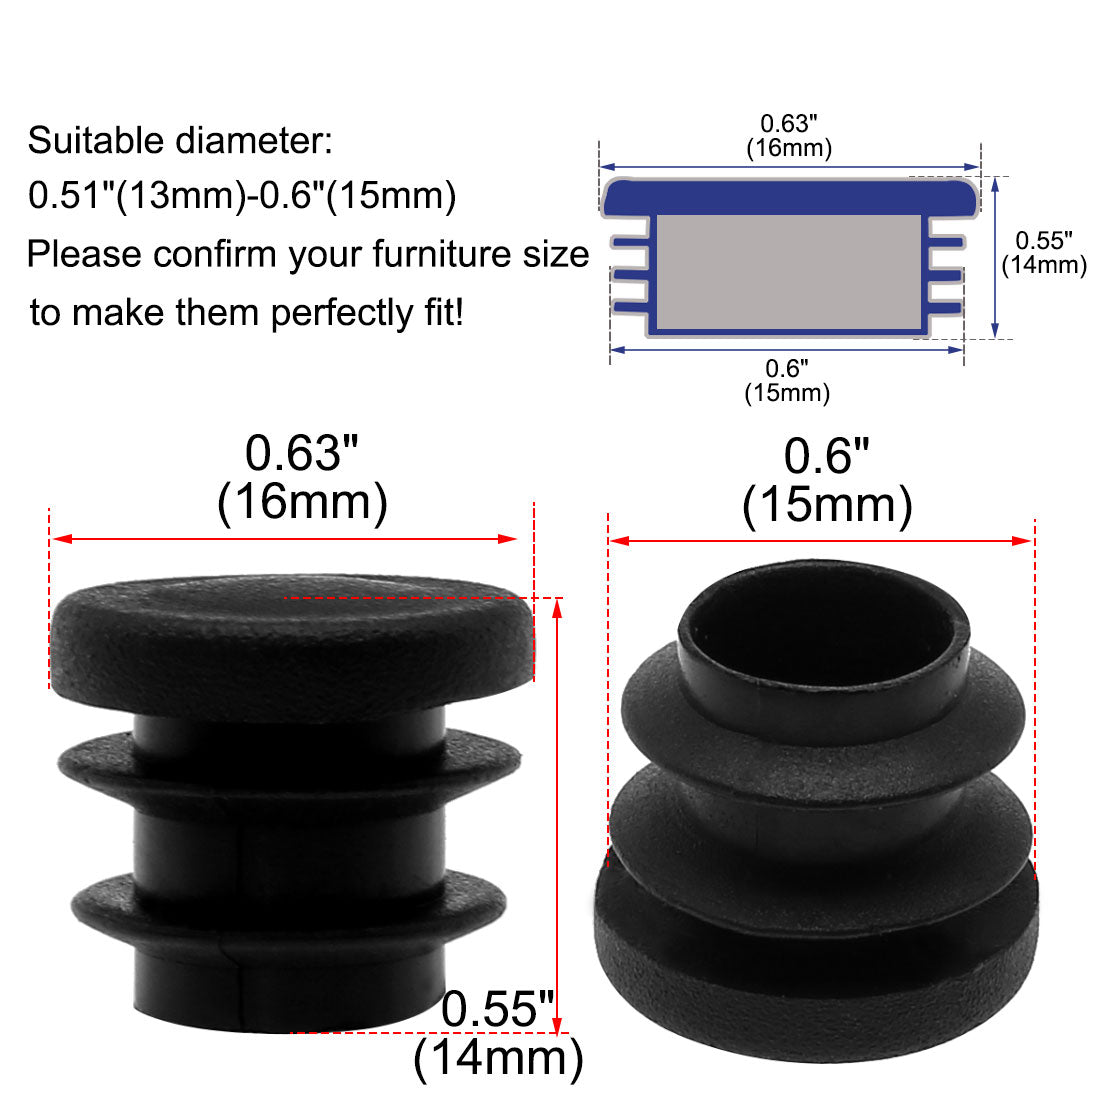 Uxcell Uxcell 5/8" 16mm OD Plastic Round Tube Ribbed Inserts End Cover Caps 18pcs, 0.51"-0.6" Inner Dia, Floor Furniture Chair Desk Protector